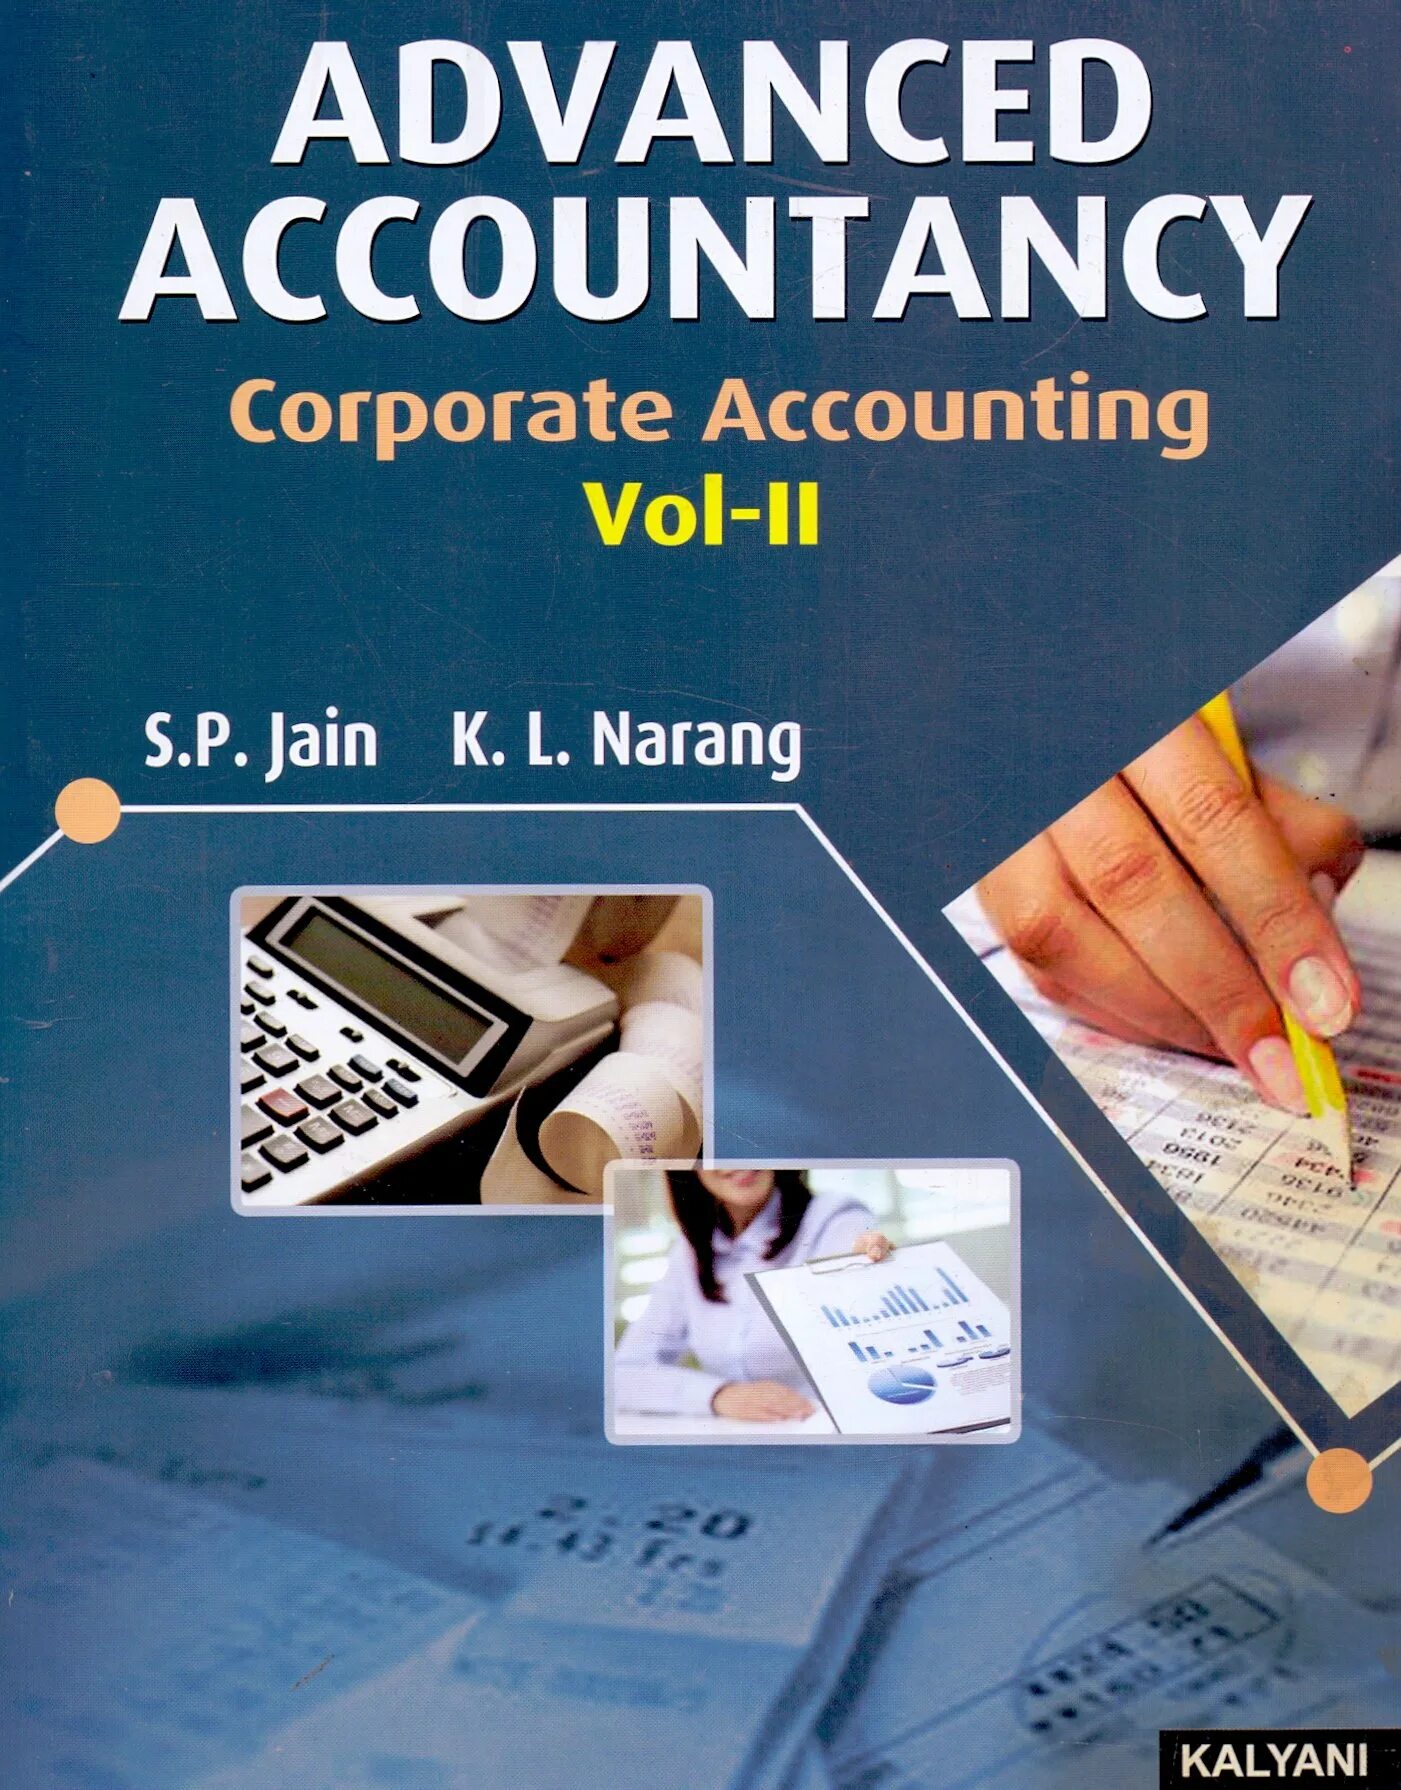 Accounting book. Accounting books. Accounting book Cover Design. Account book. Financial Accounting book Cover.